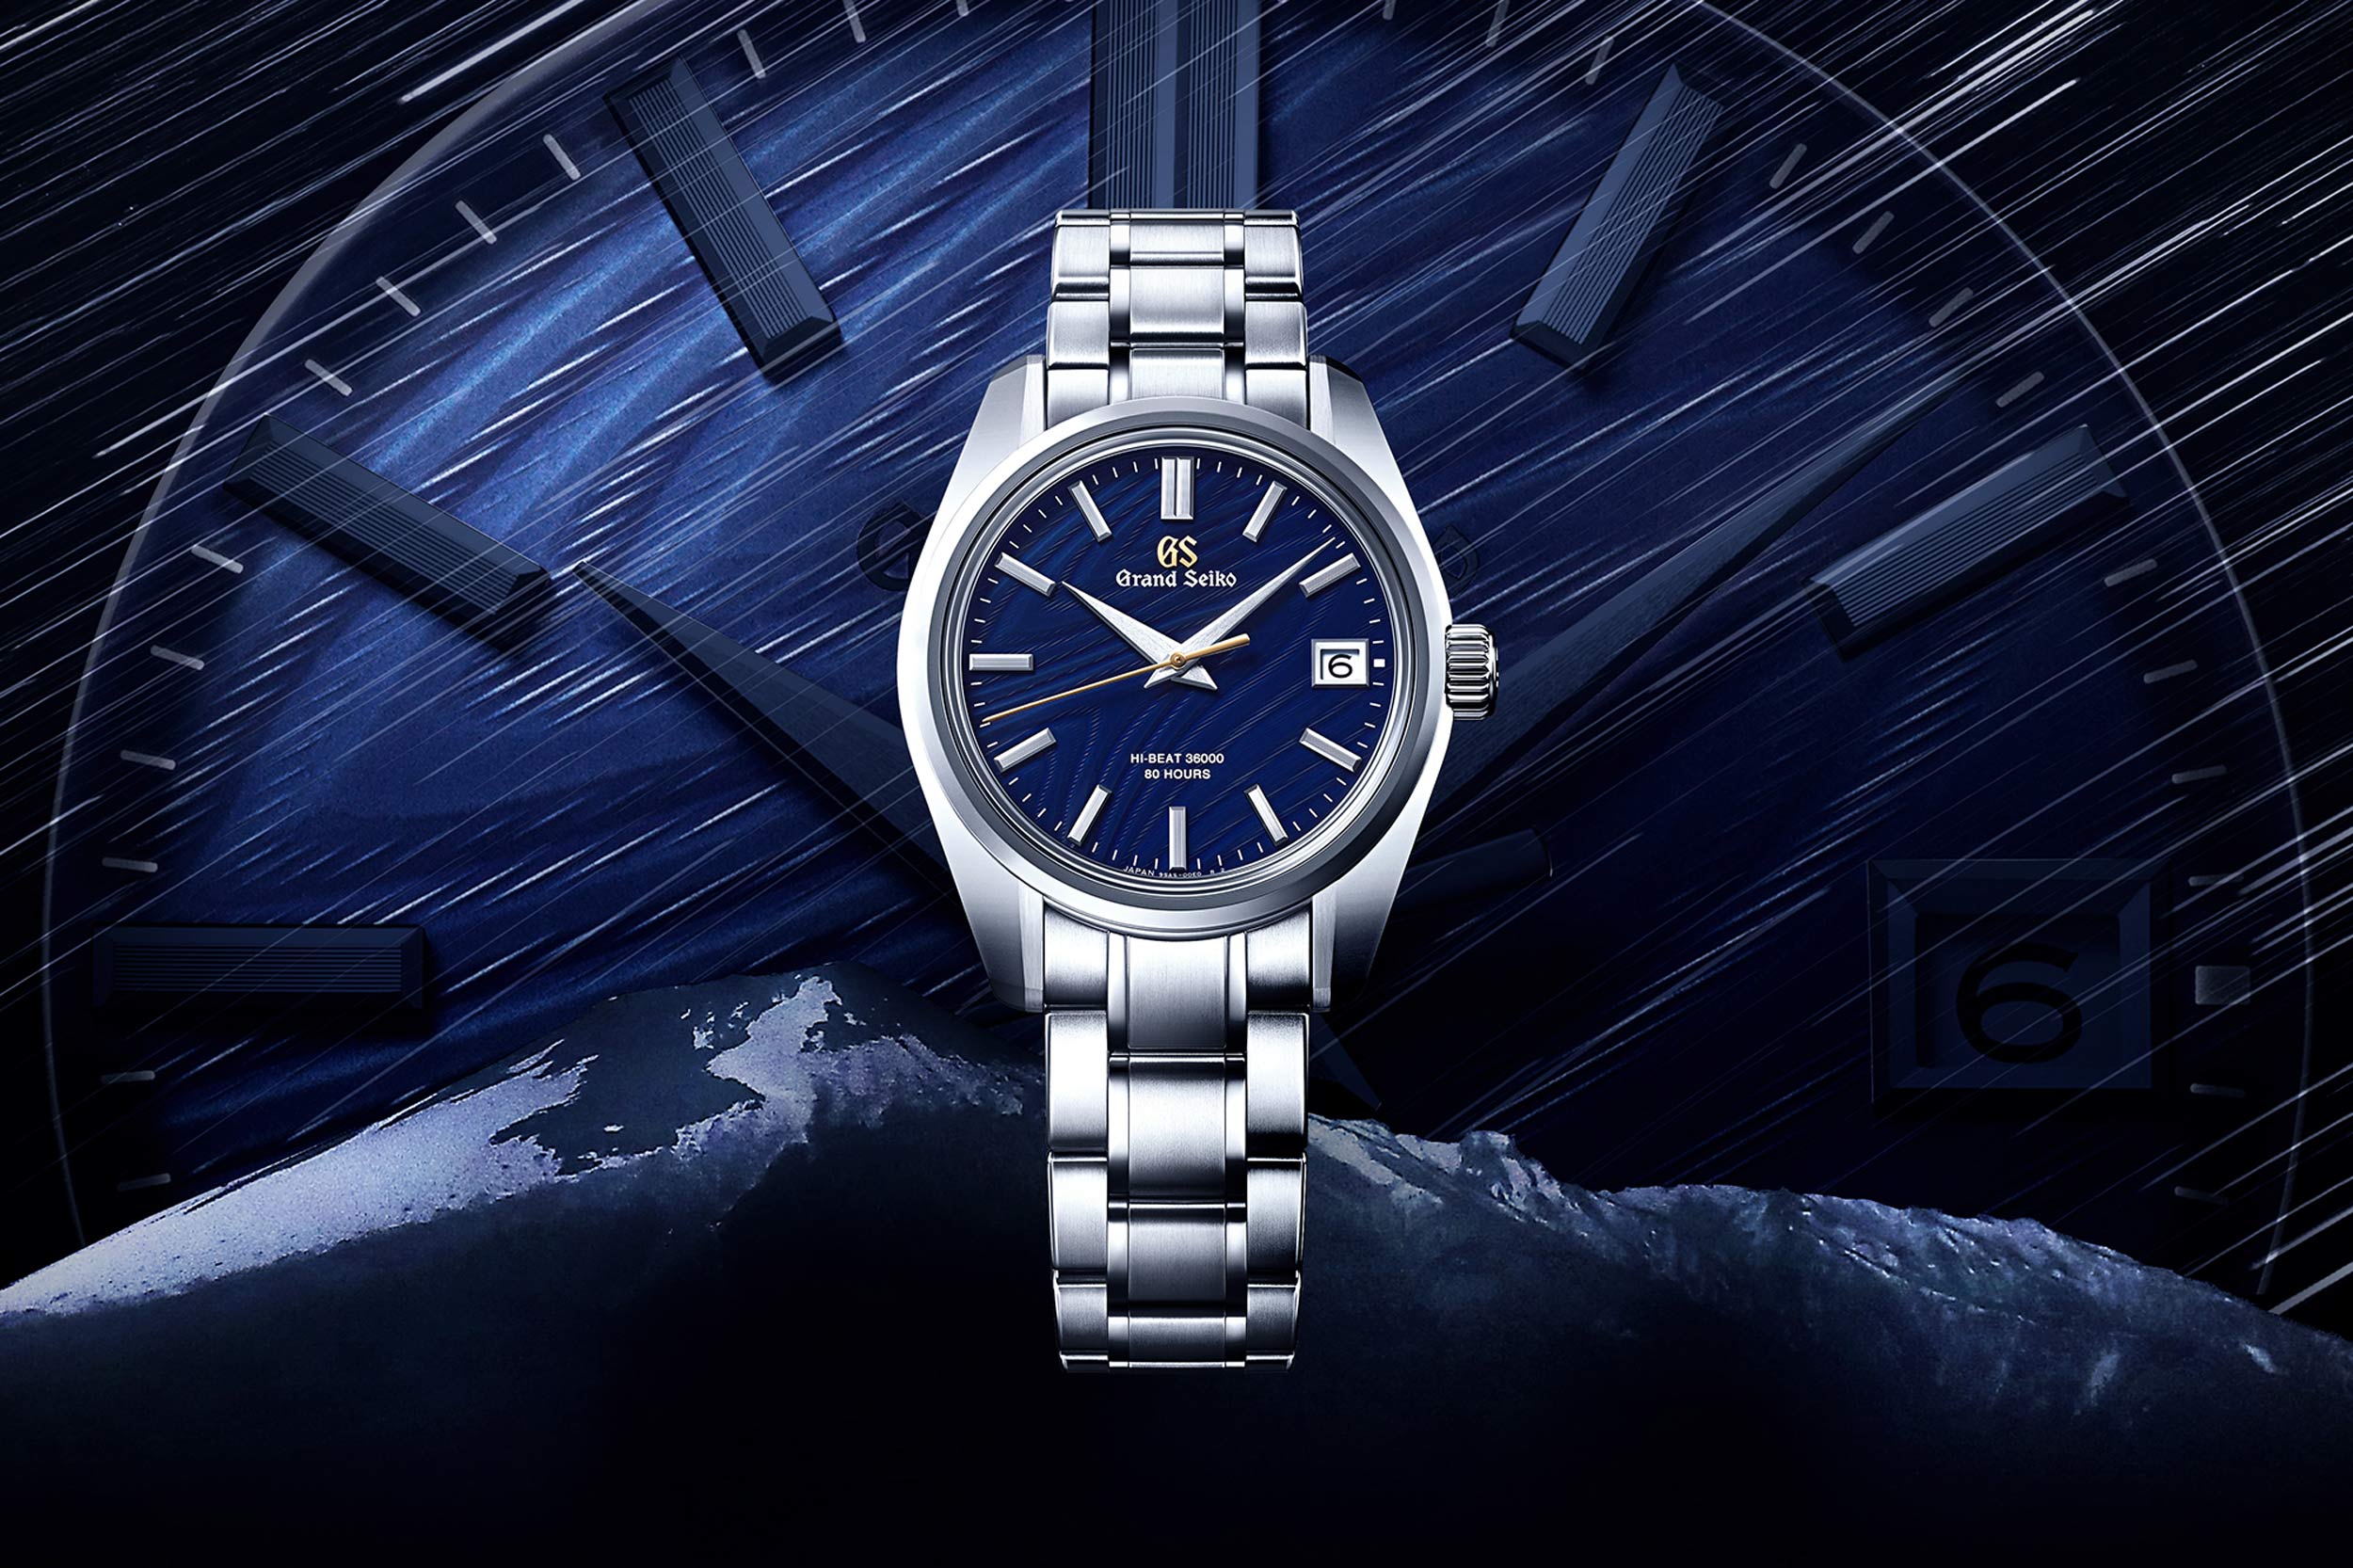 Grand Seiko Adds their Next Gen Calibers to the 44GS Case with these New  Limited Editions - Worn & Wound